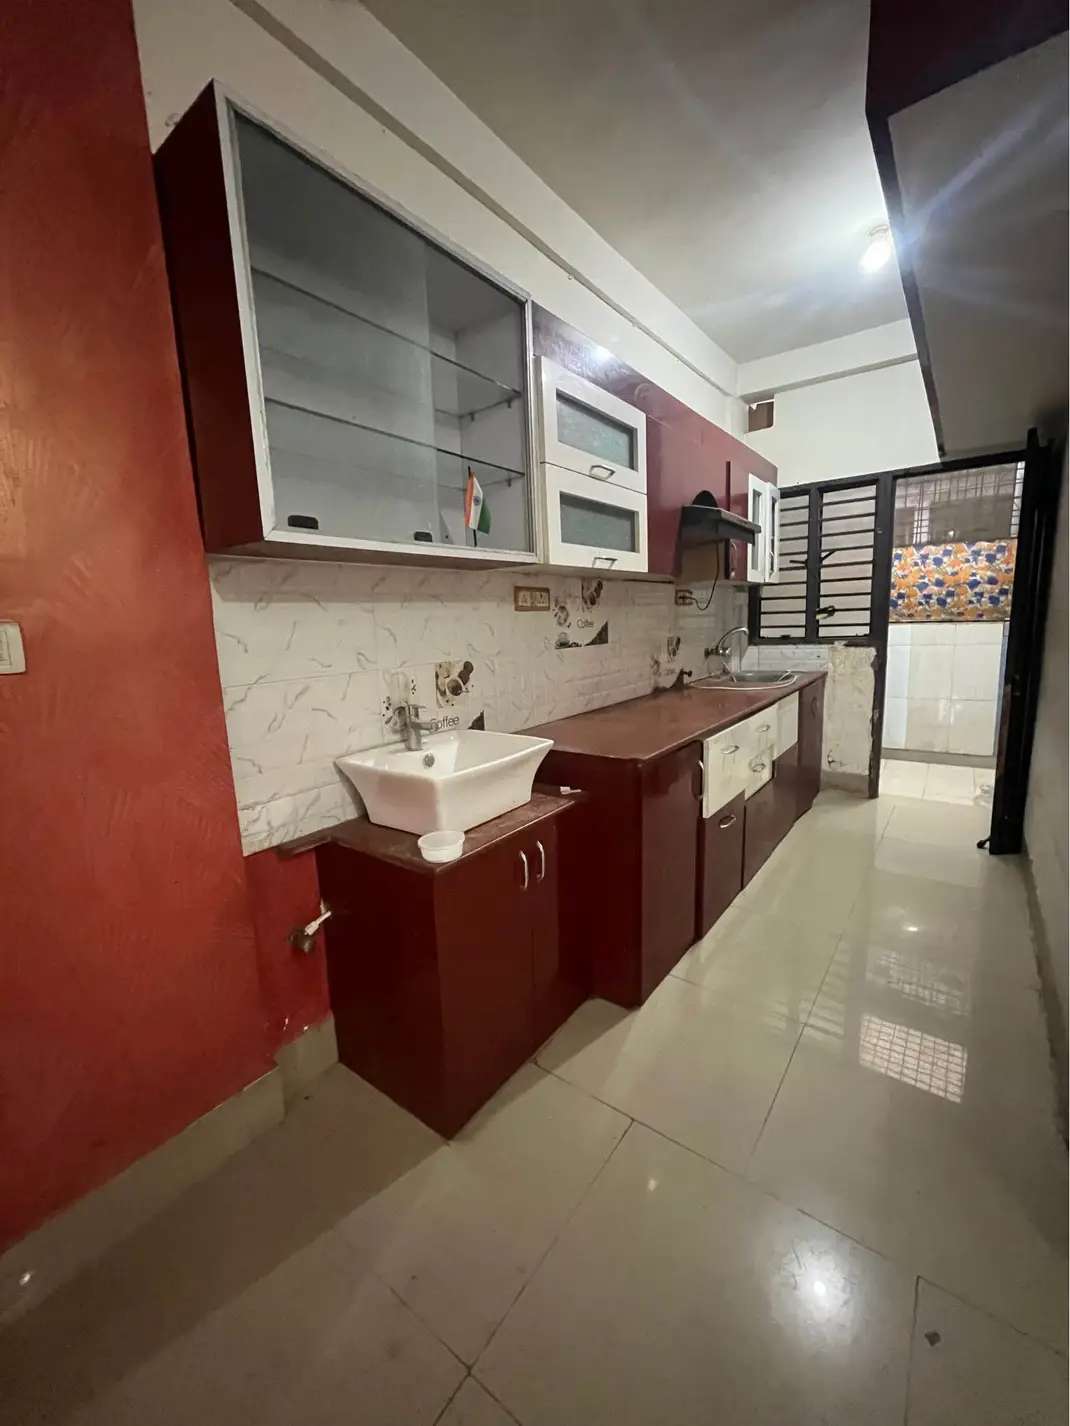 3 Bed/ 3 Bath Rent House/ Bungalow/ Villa, Semi Furnished for rent @Ayodhya bypass road Bhopal